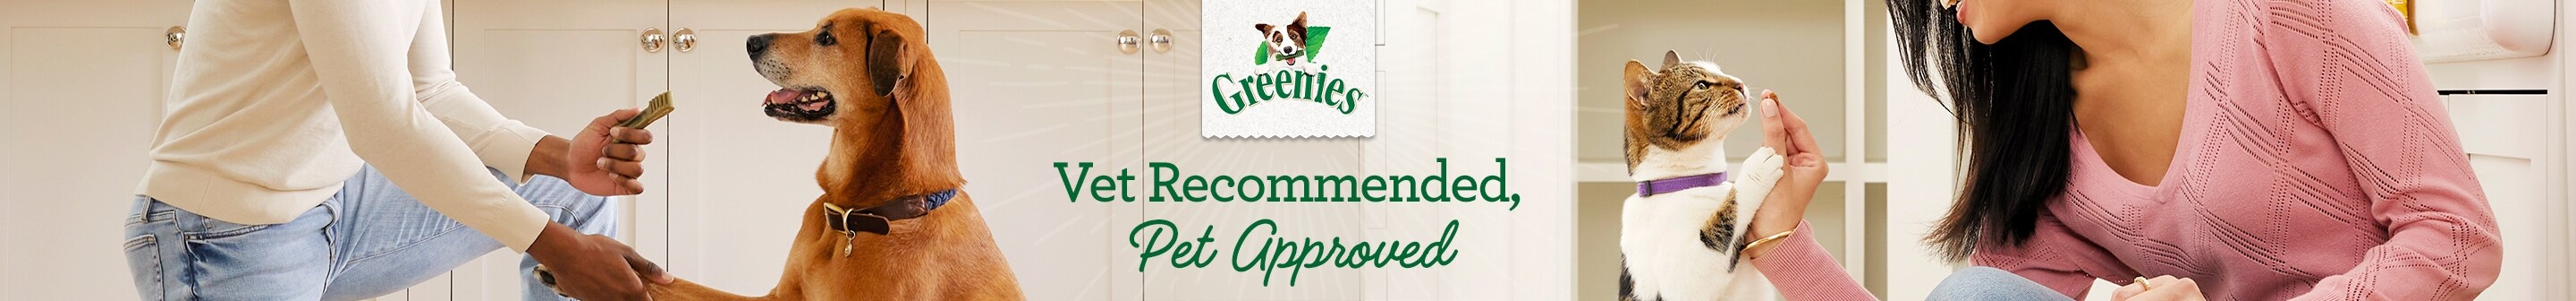 Greenies Vet Recommended Pet Approved